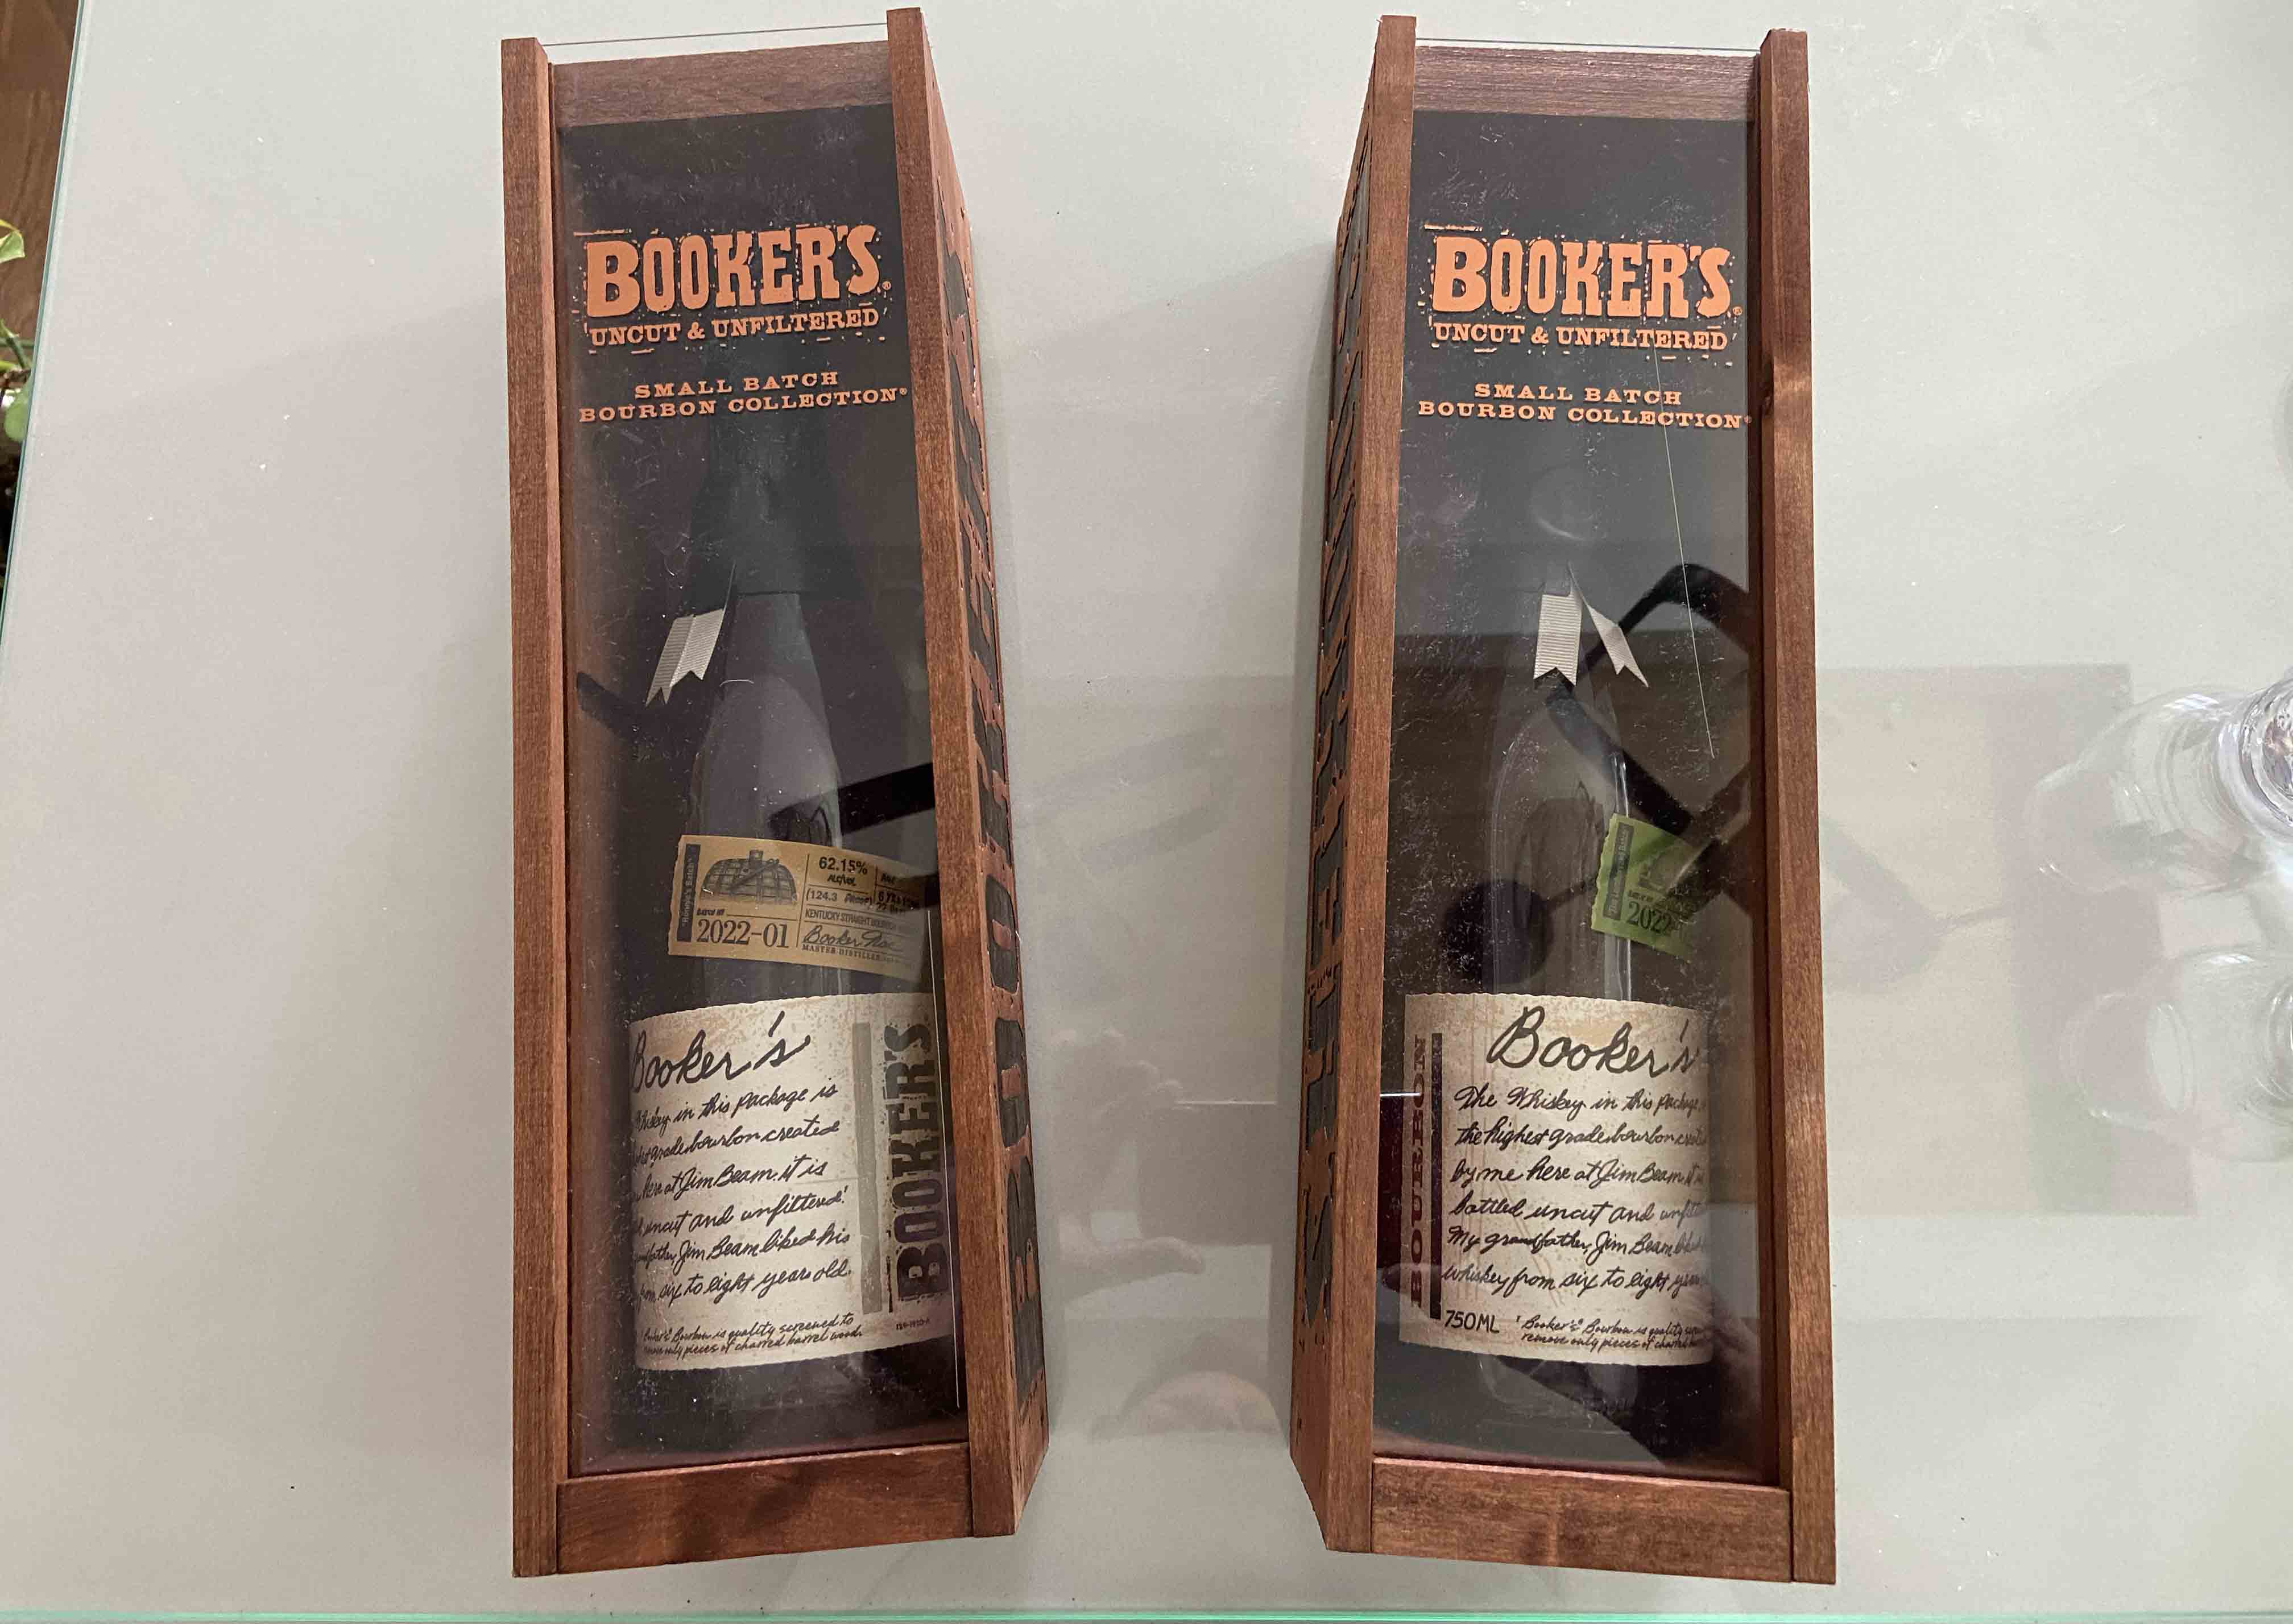 The two new releases of Booker's Bourbon